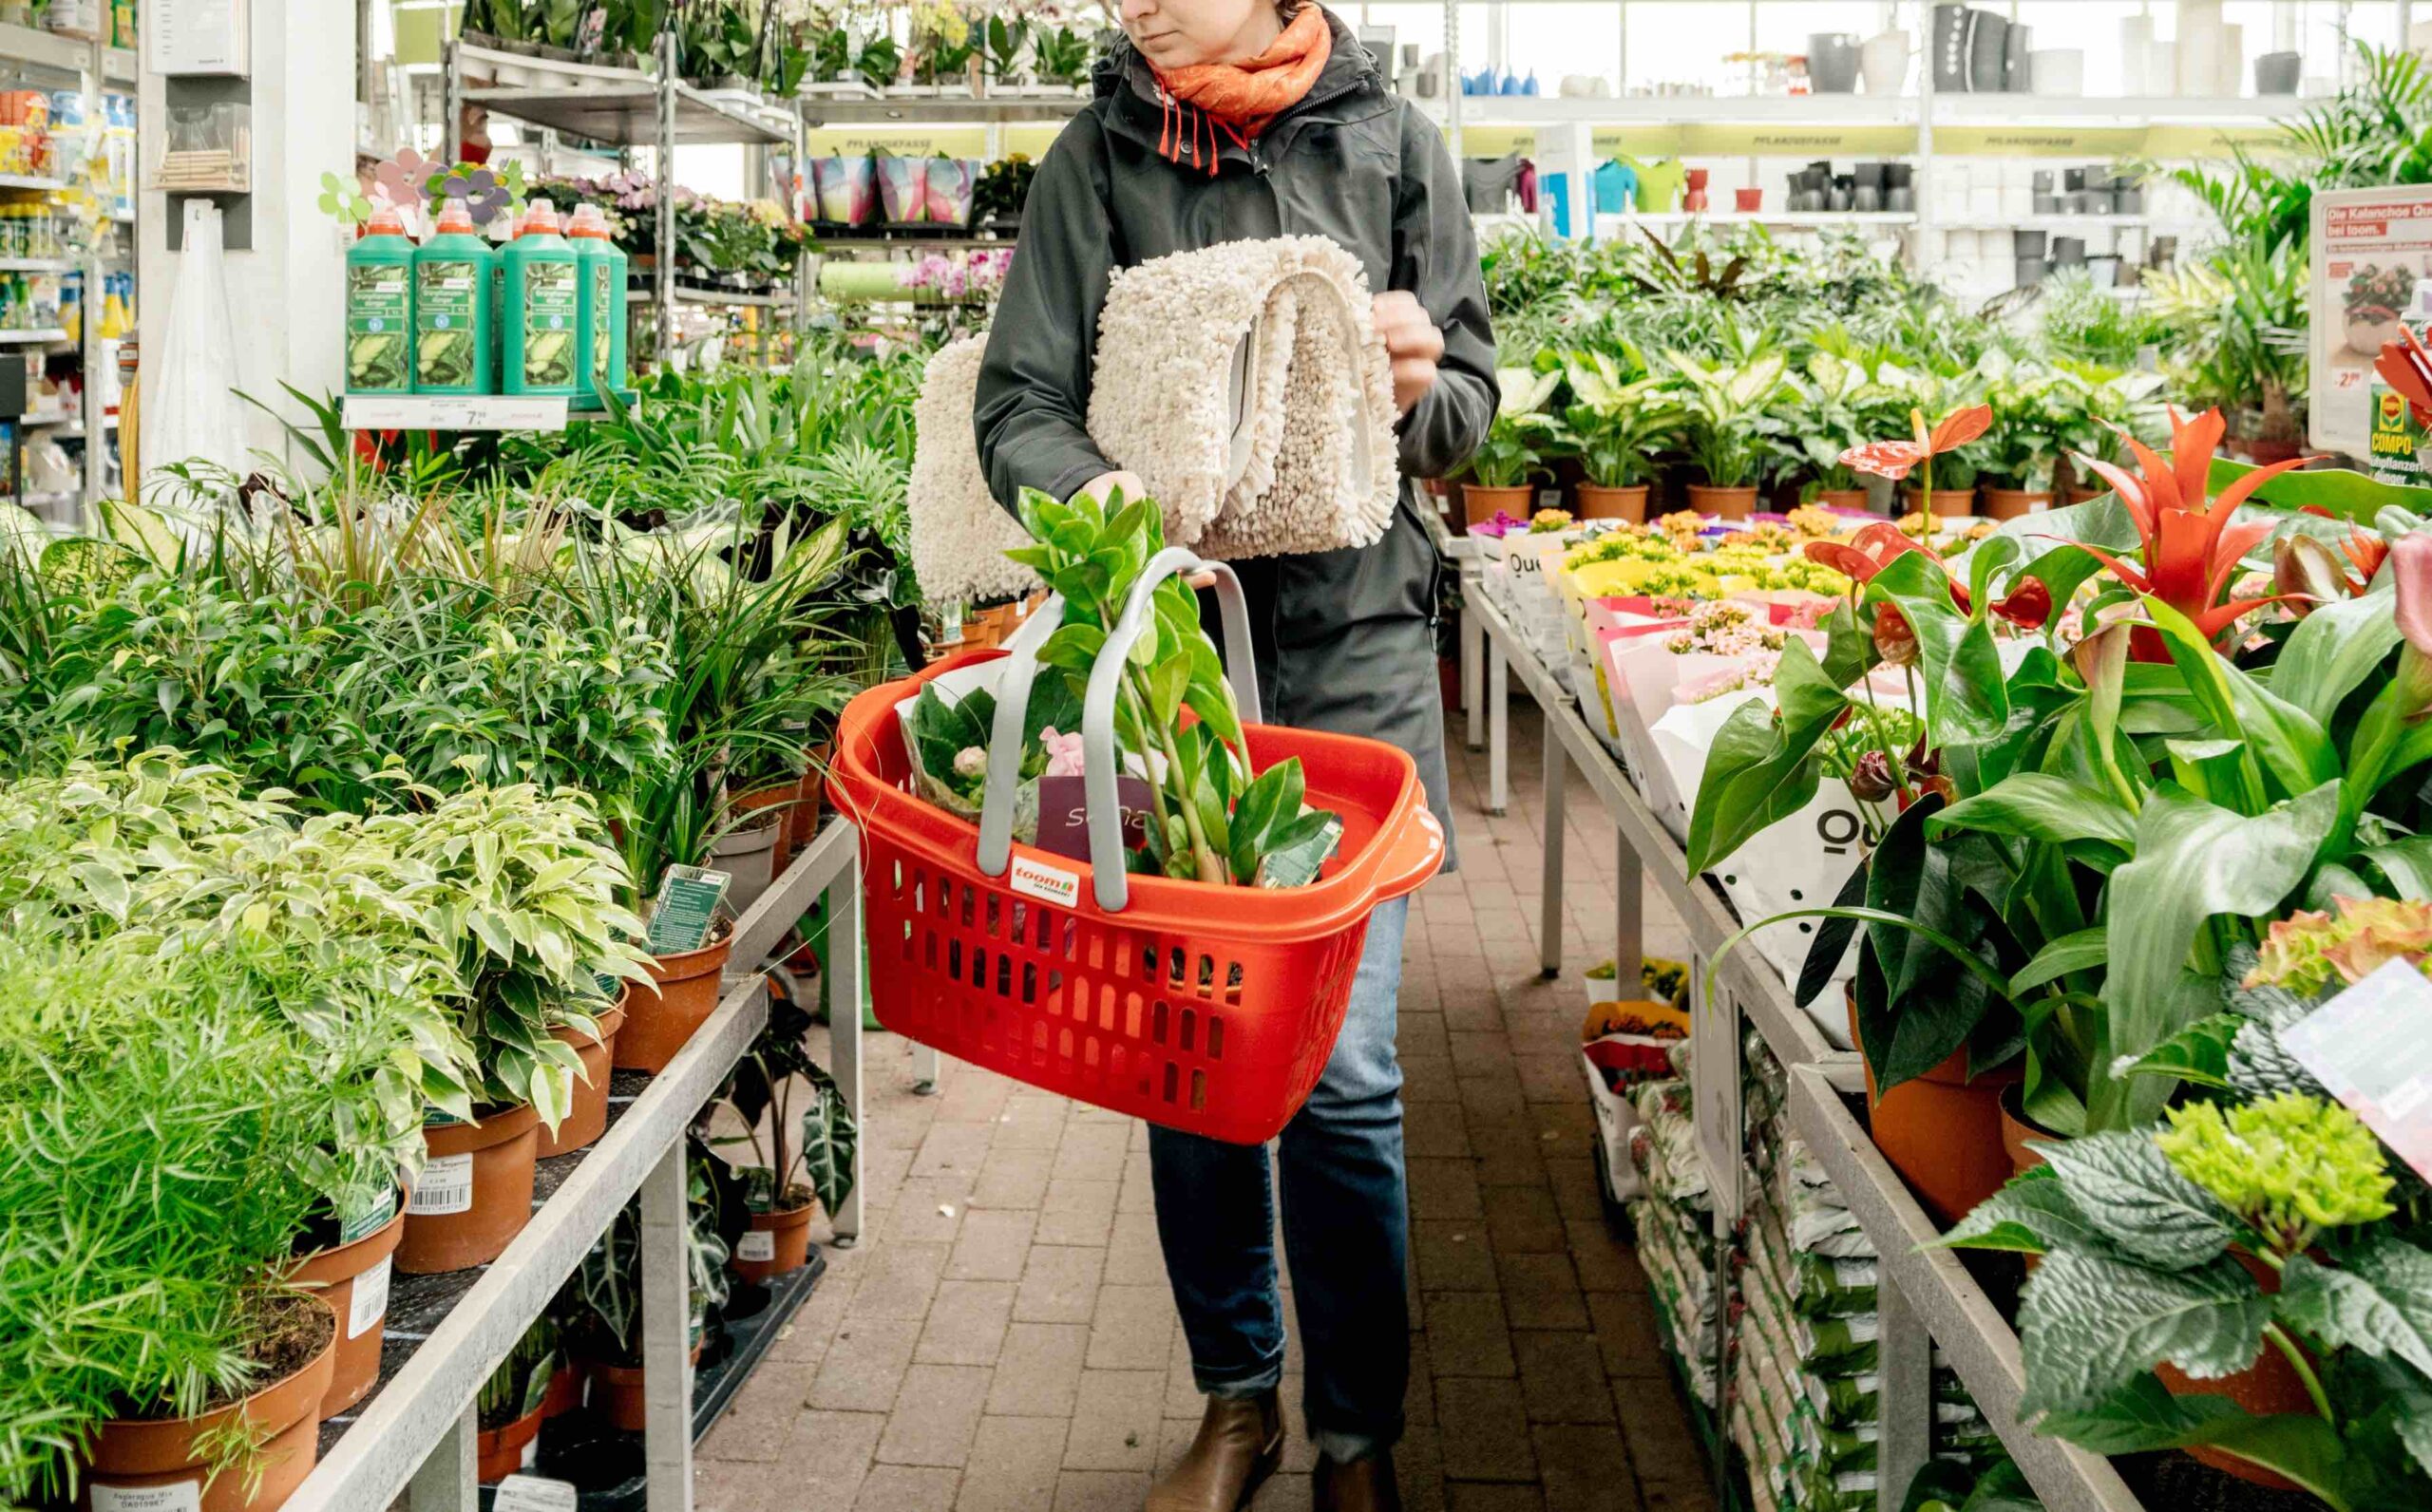 A woman with a shopping basket in the produce aisle of a grocery store.